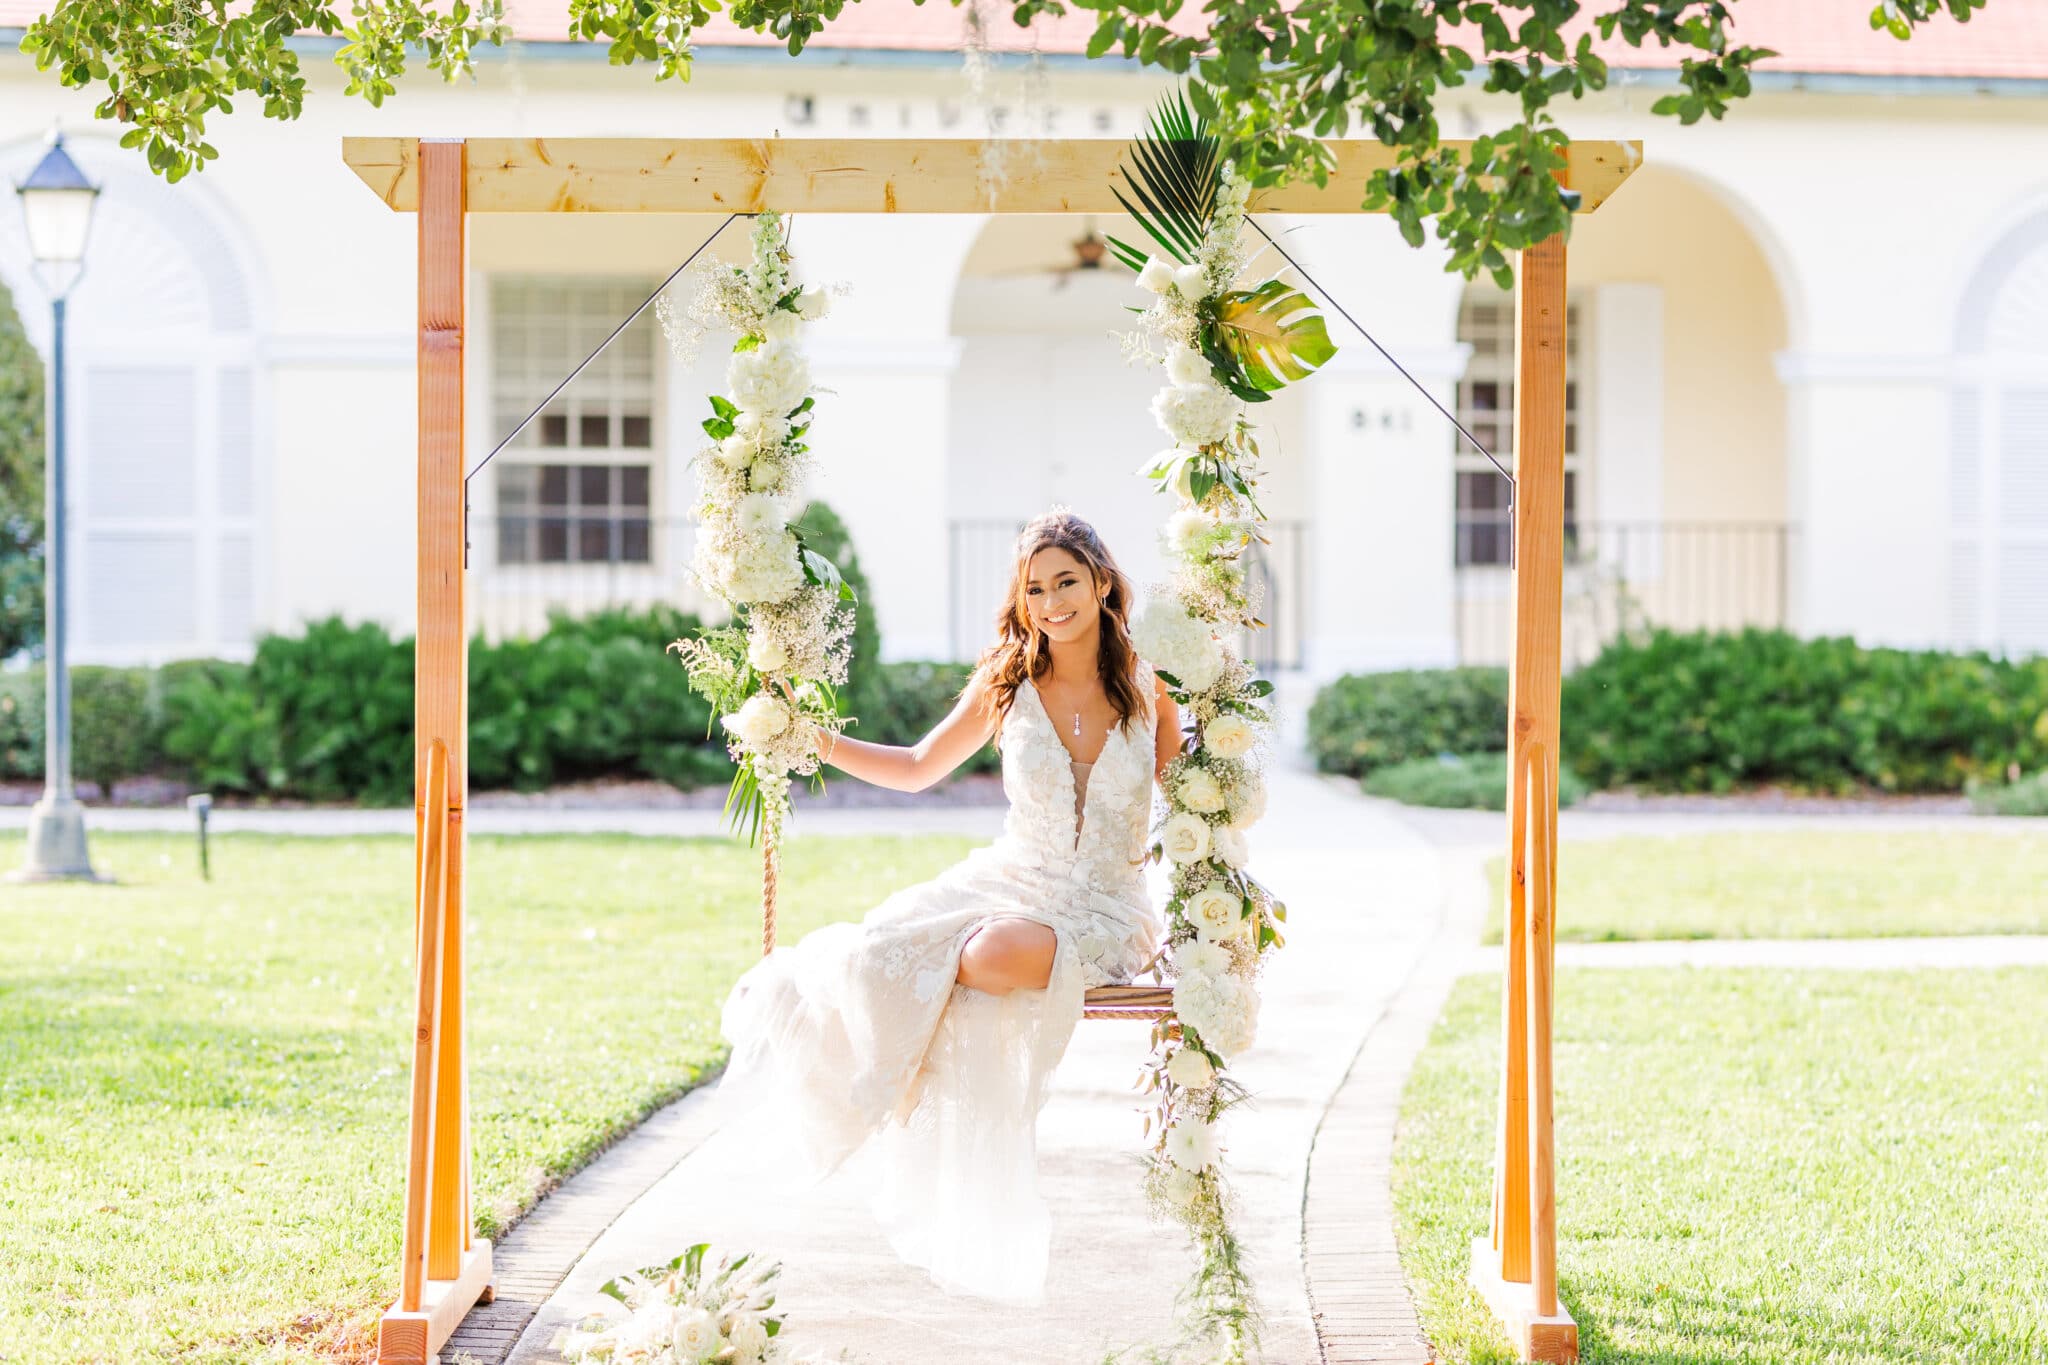 bride sitting on a flower swing for the glamorous gold wedding inspiration shoot.